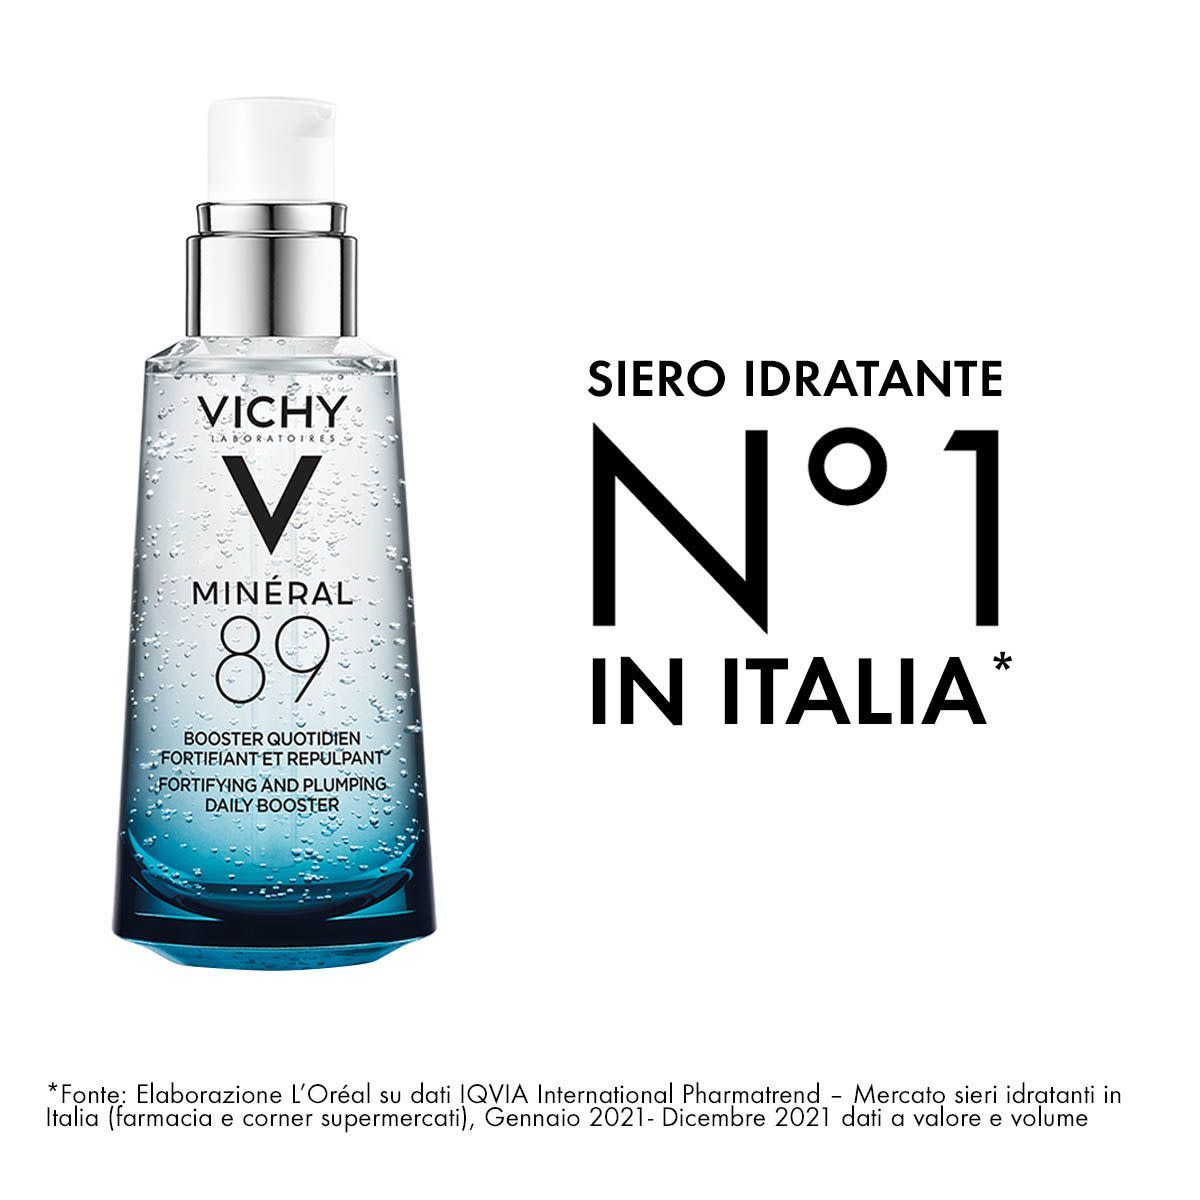 972458083 - Vichy Mineral 89 Booster quotidiano 50ml - 7885792_3.jpg